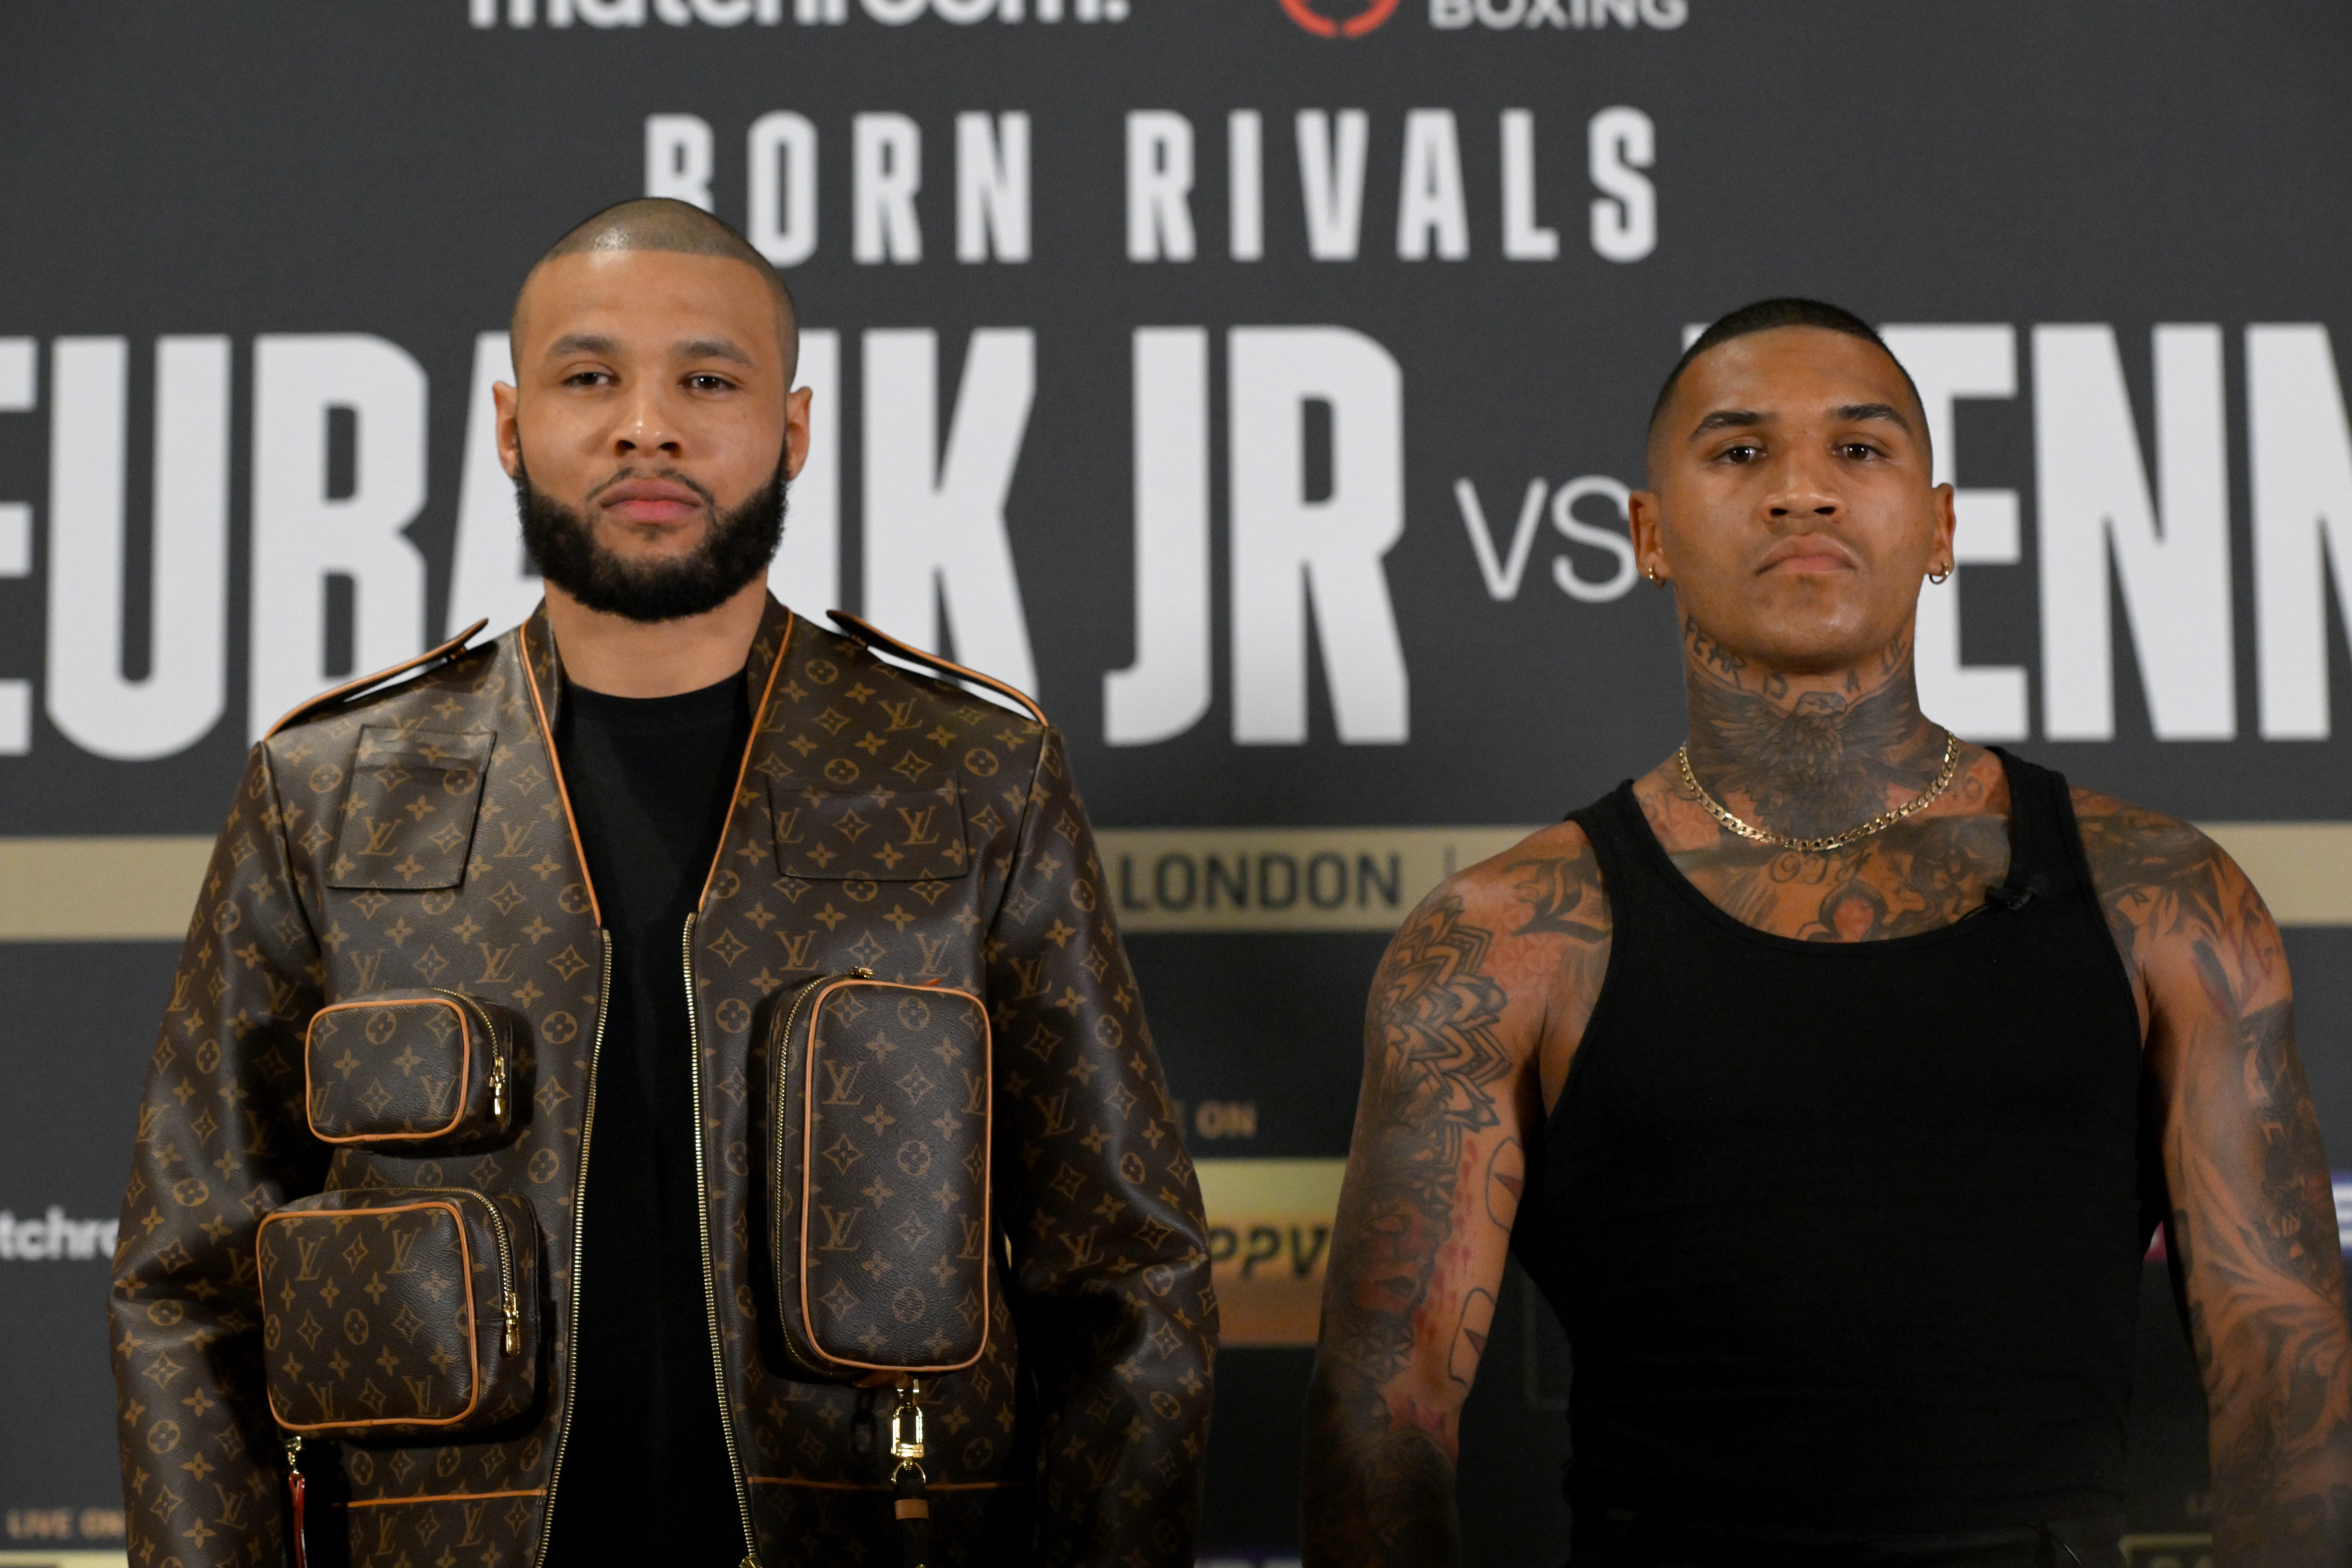 Chris Eubank Jr and Conor Benn grant behind the scenes access to their training camps leading into their showdown.